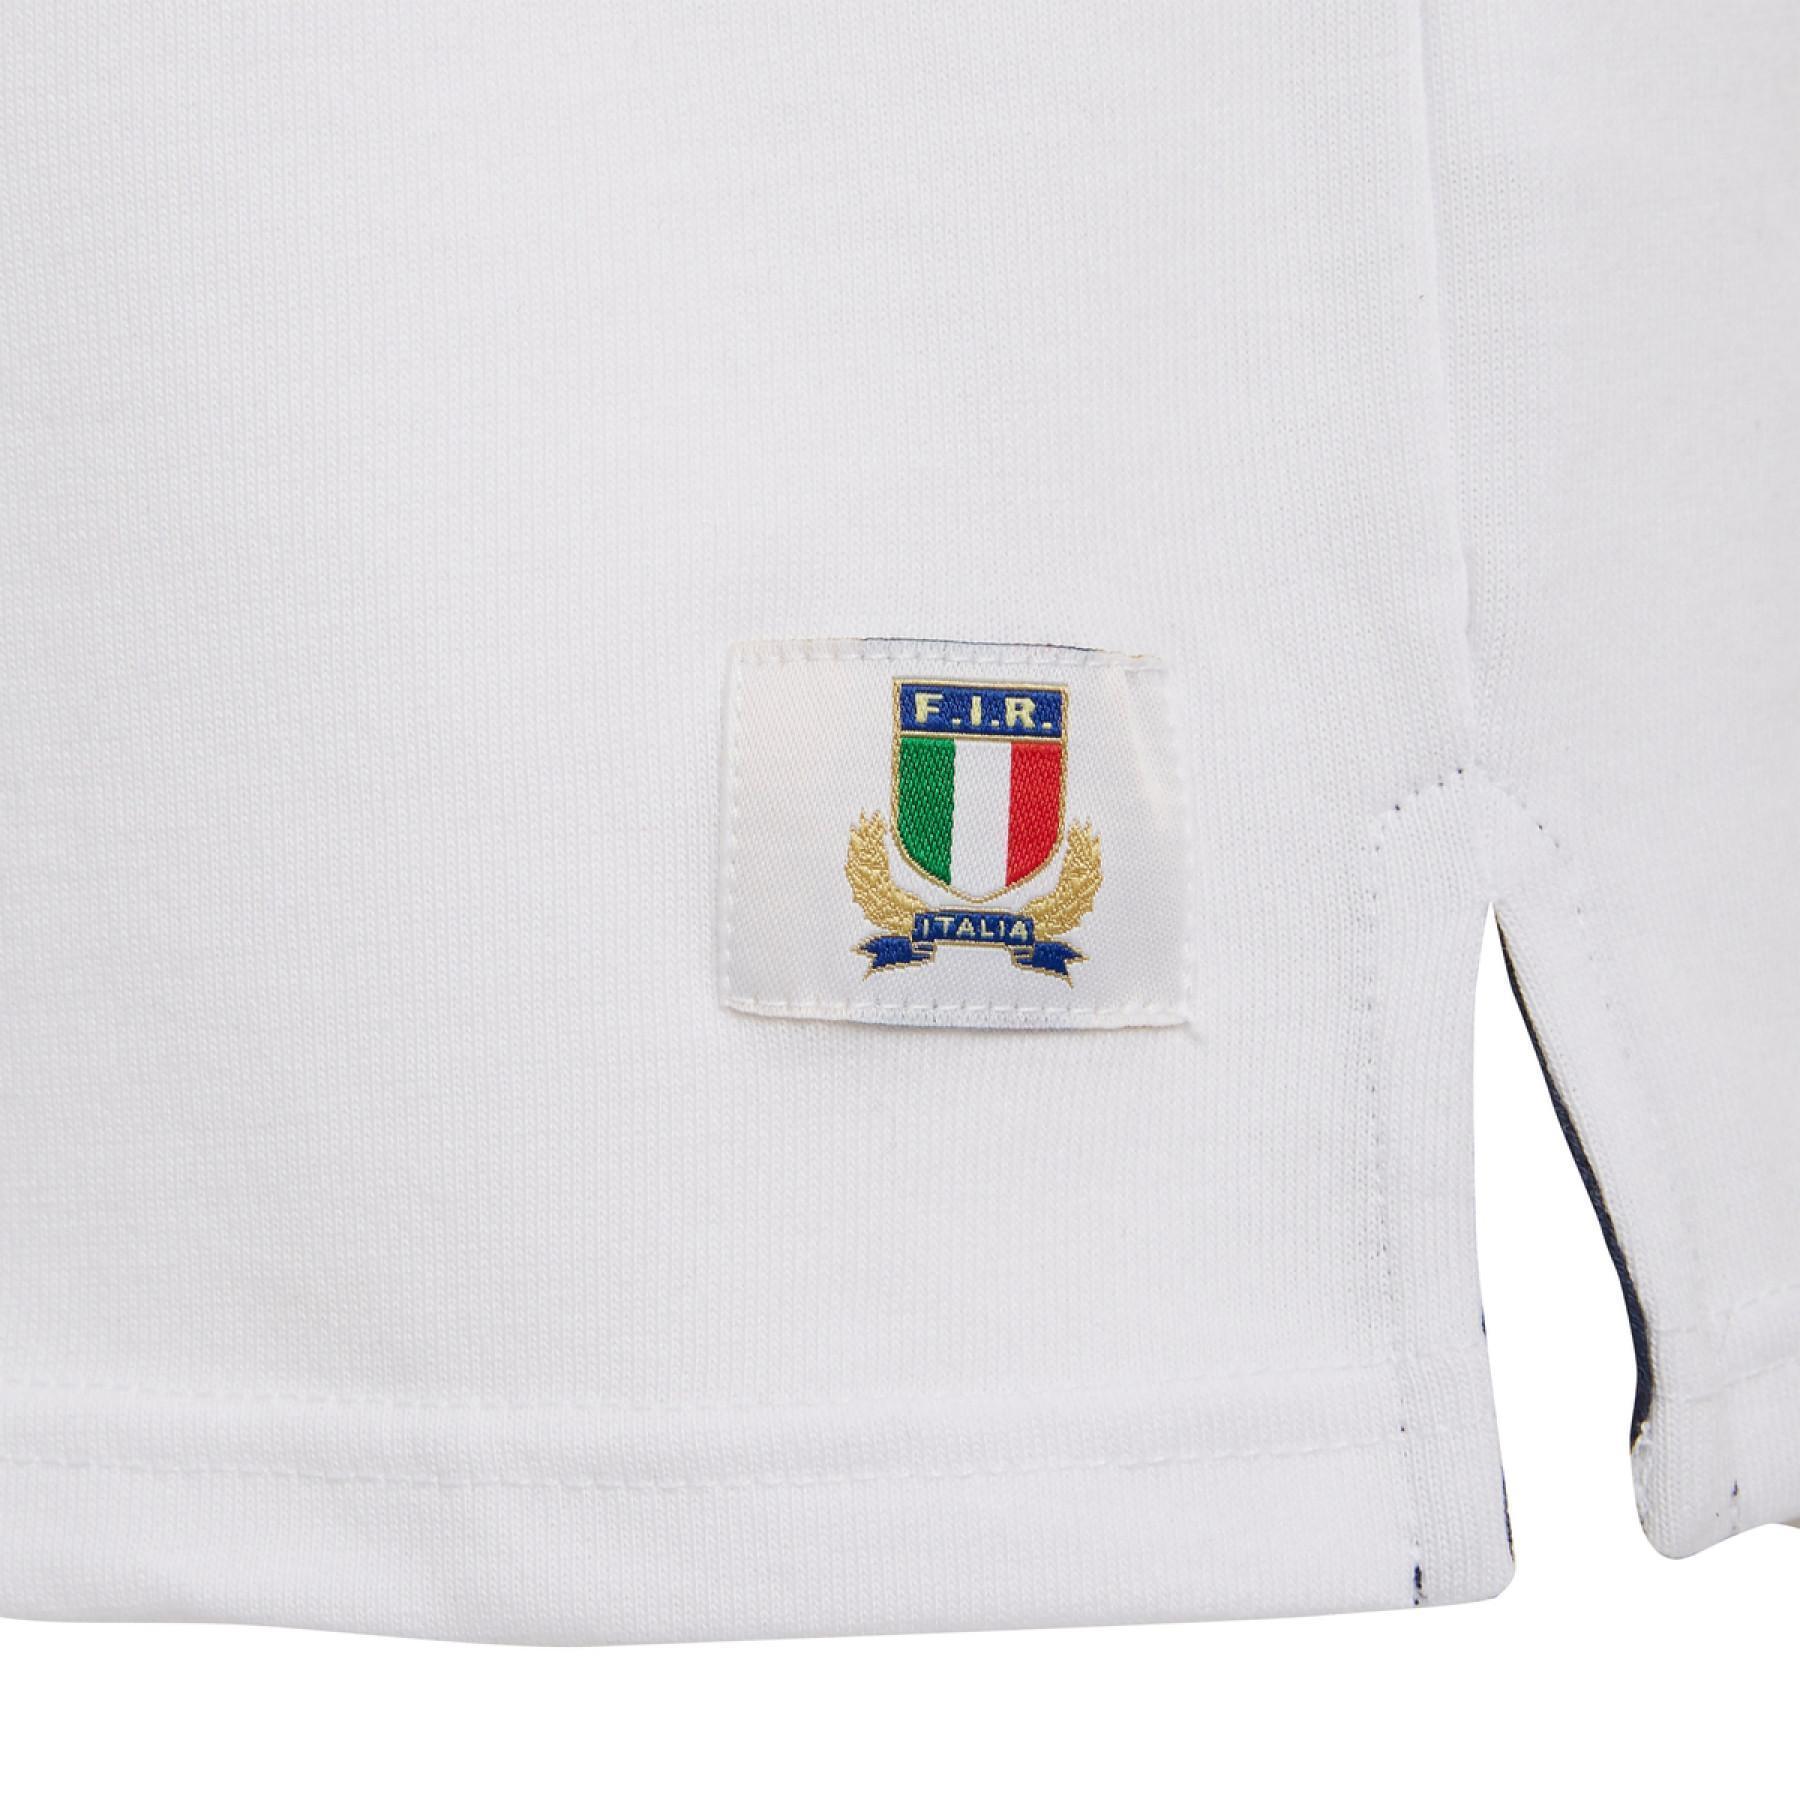 T-shirt per bambini cotone Italie rugby 2019